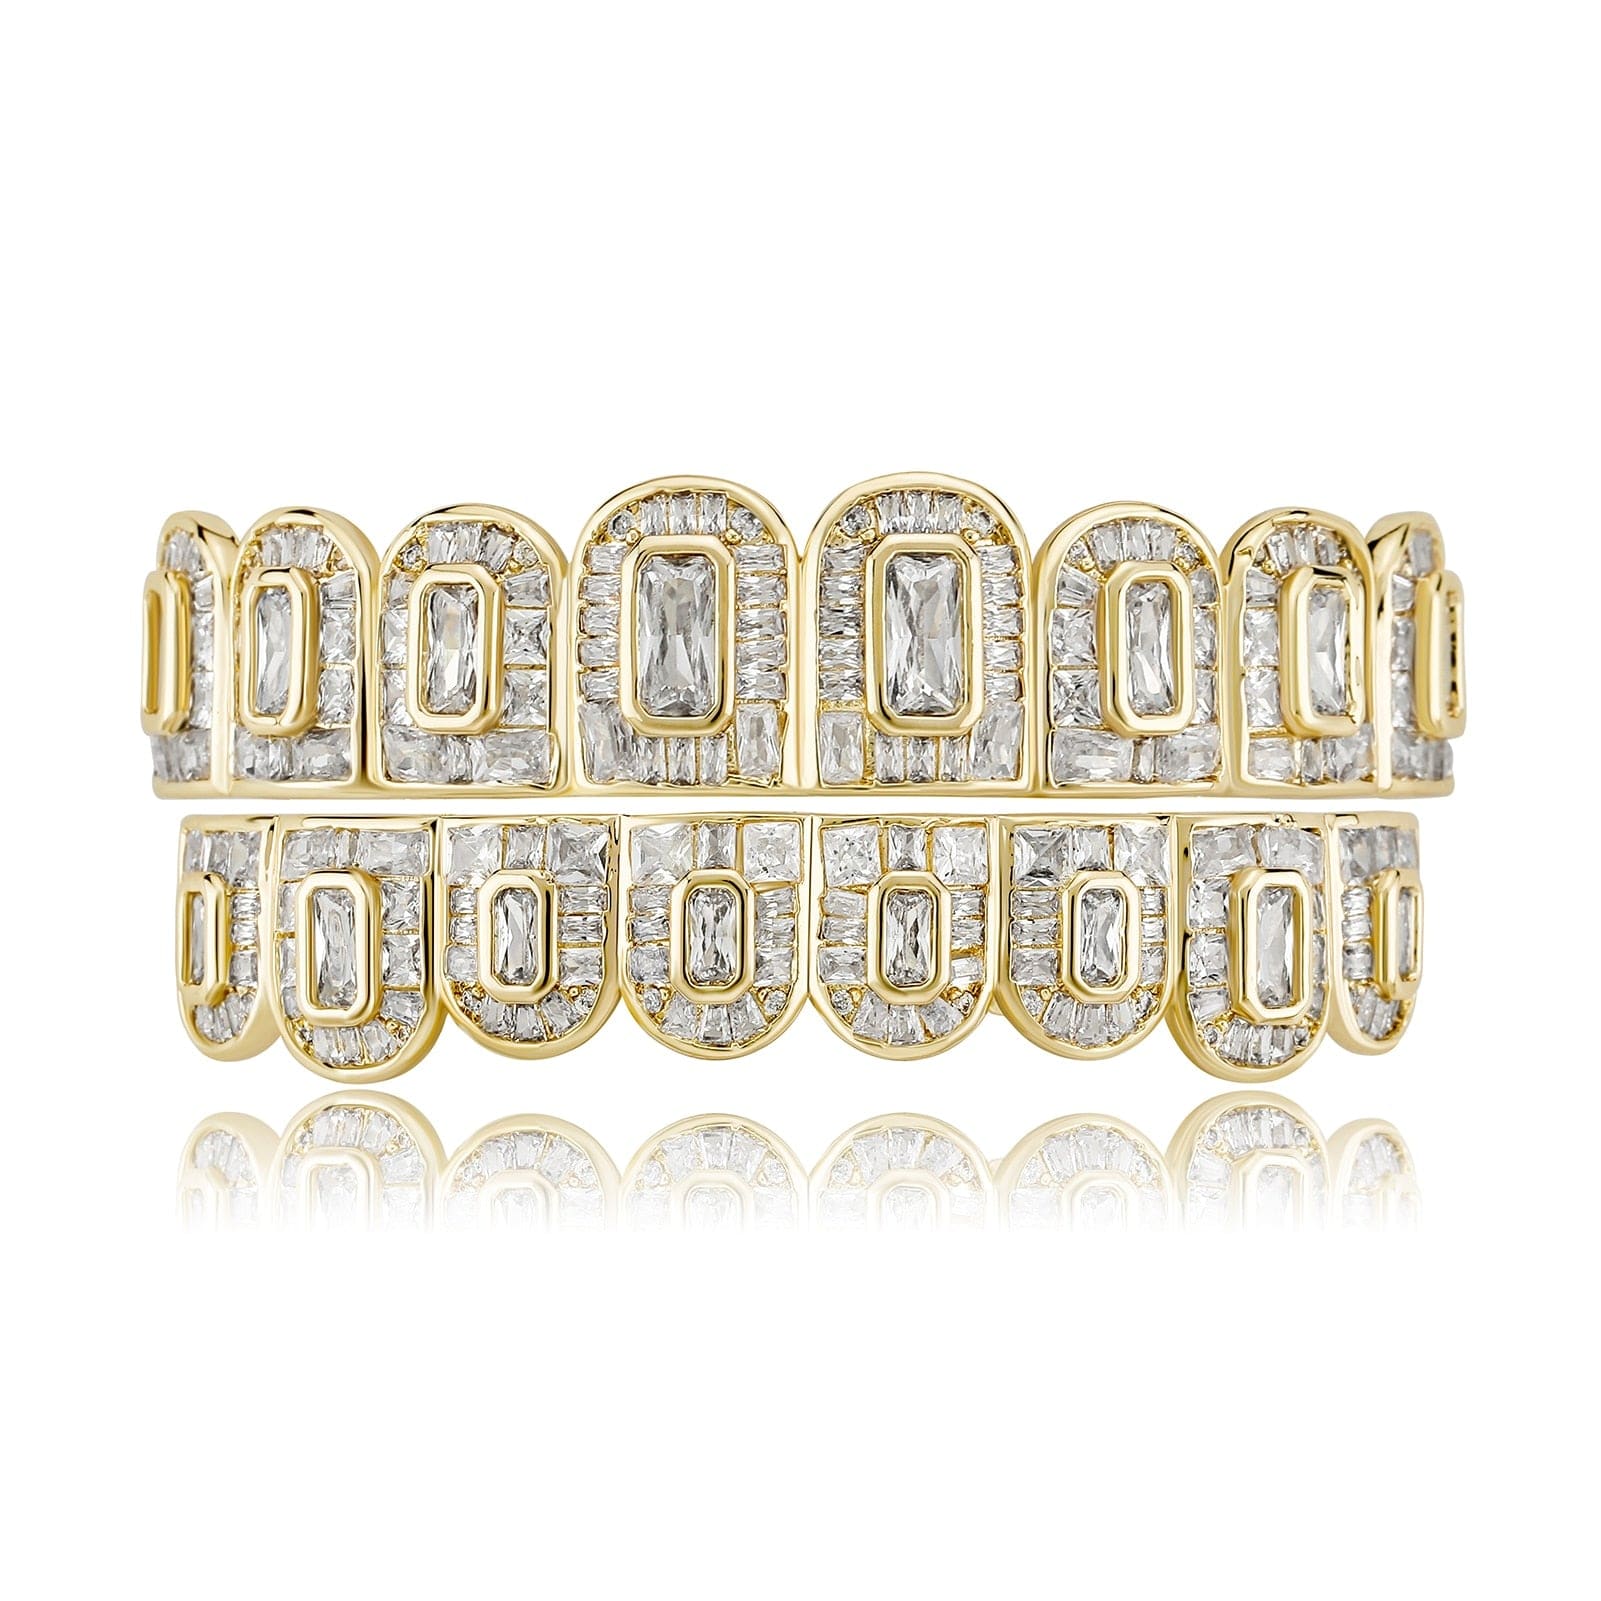 VVS Jewelry hip hop jewelry Gold Fully Rectangle Cut Baguette Iced Out Grillz